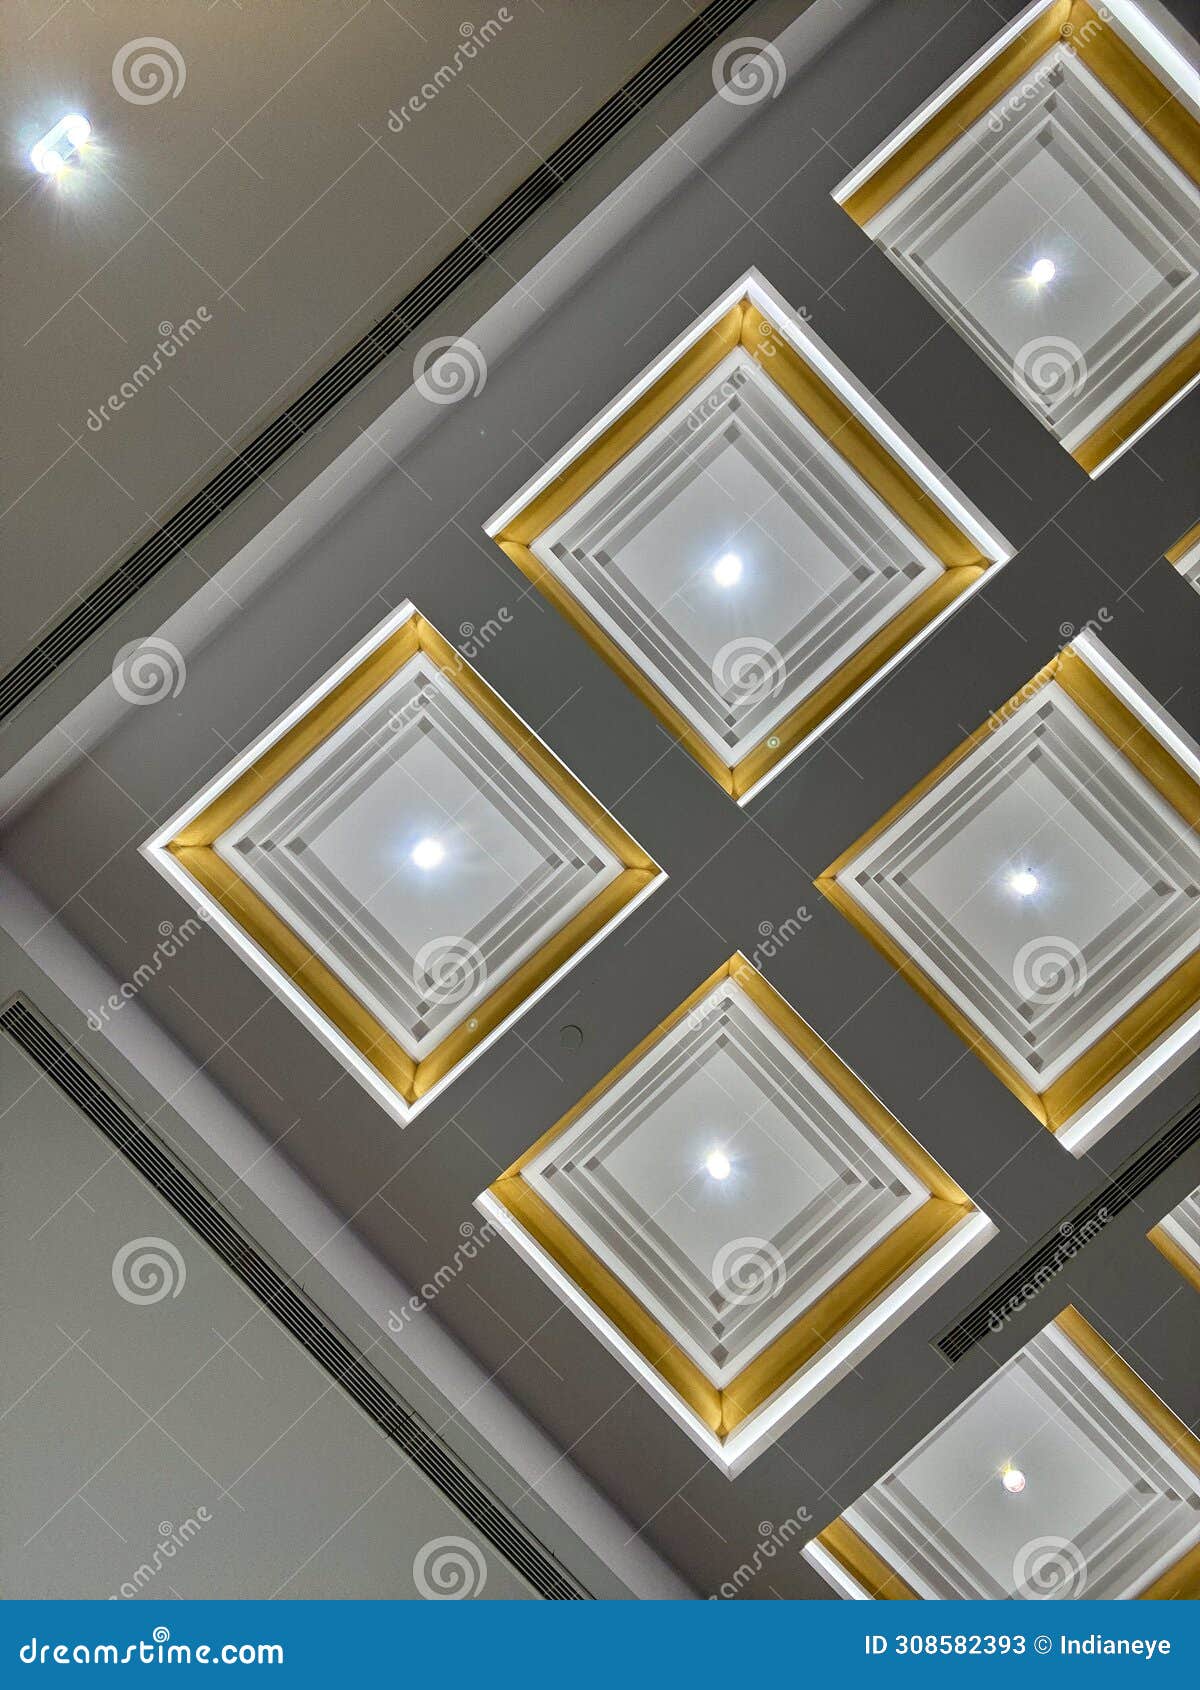 ceiling with embedded lights